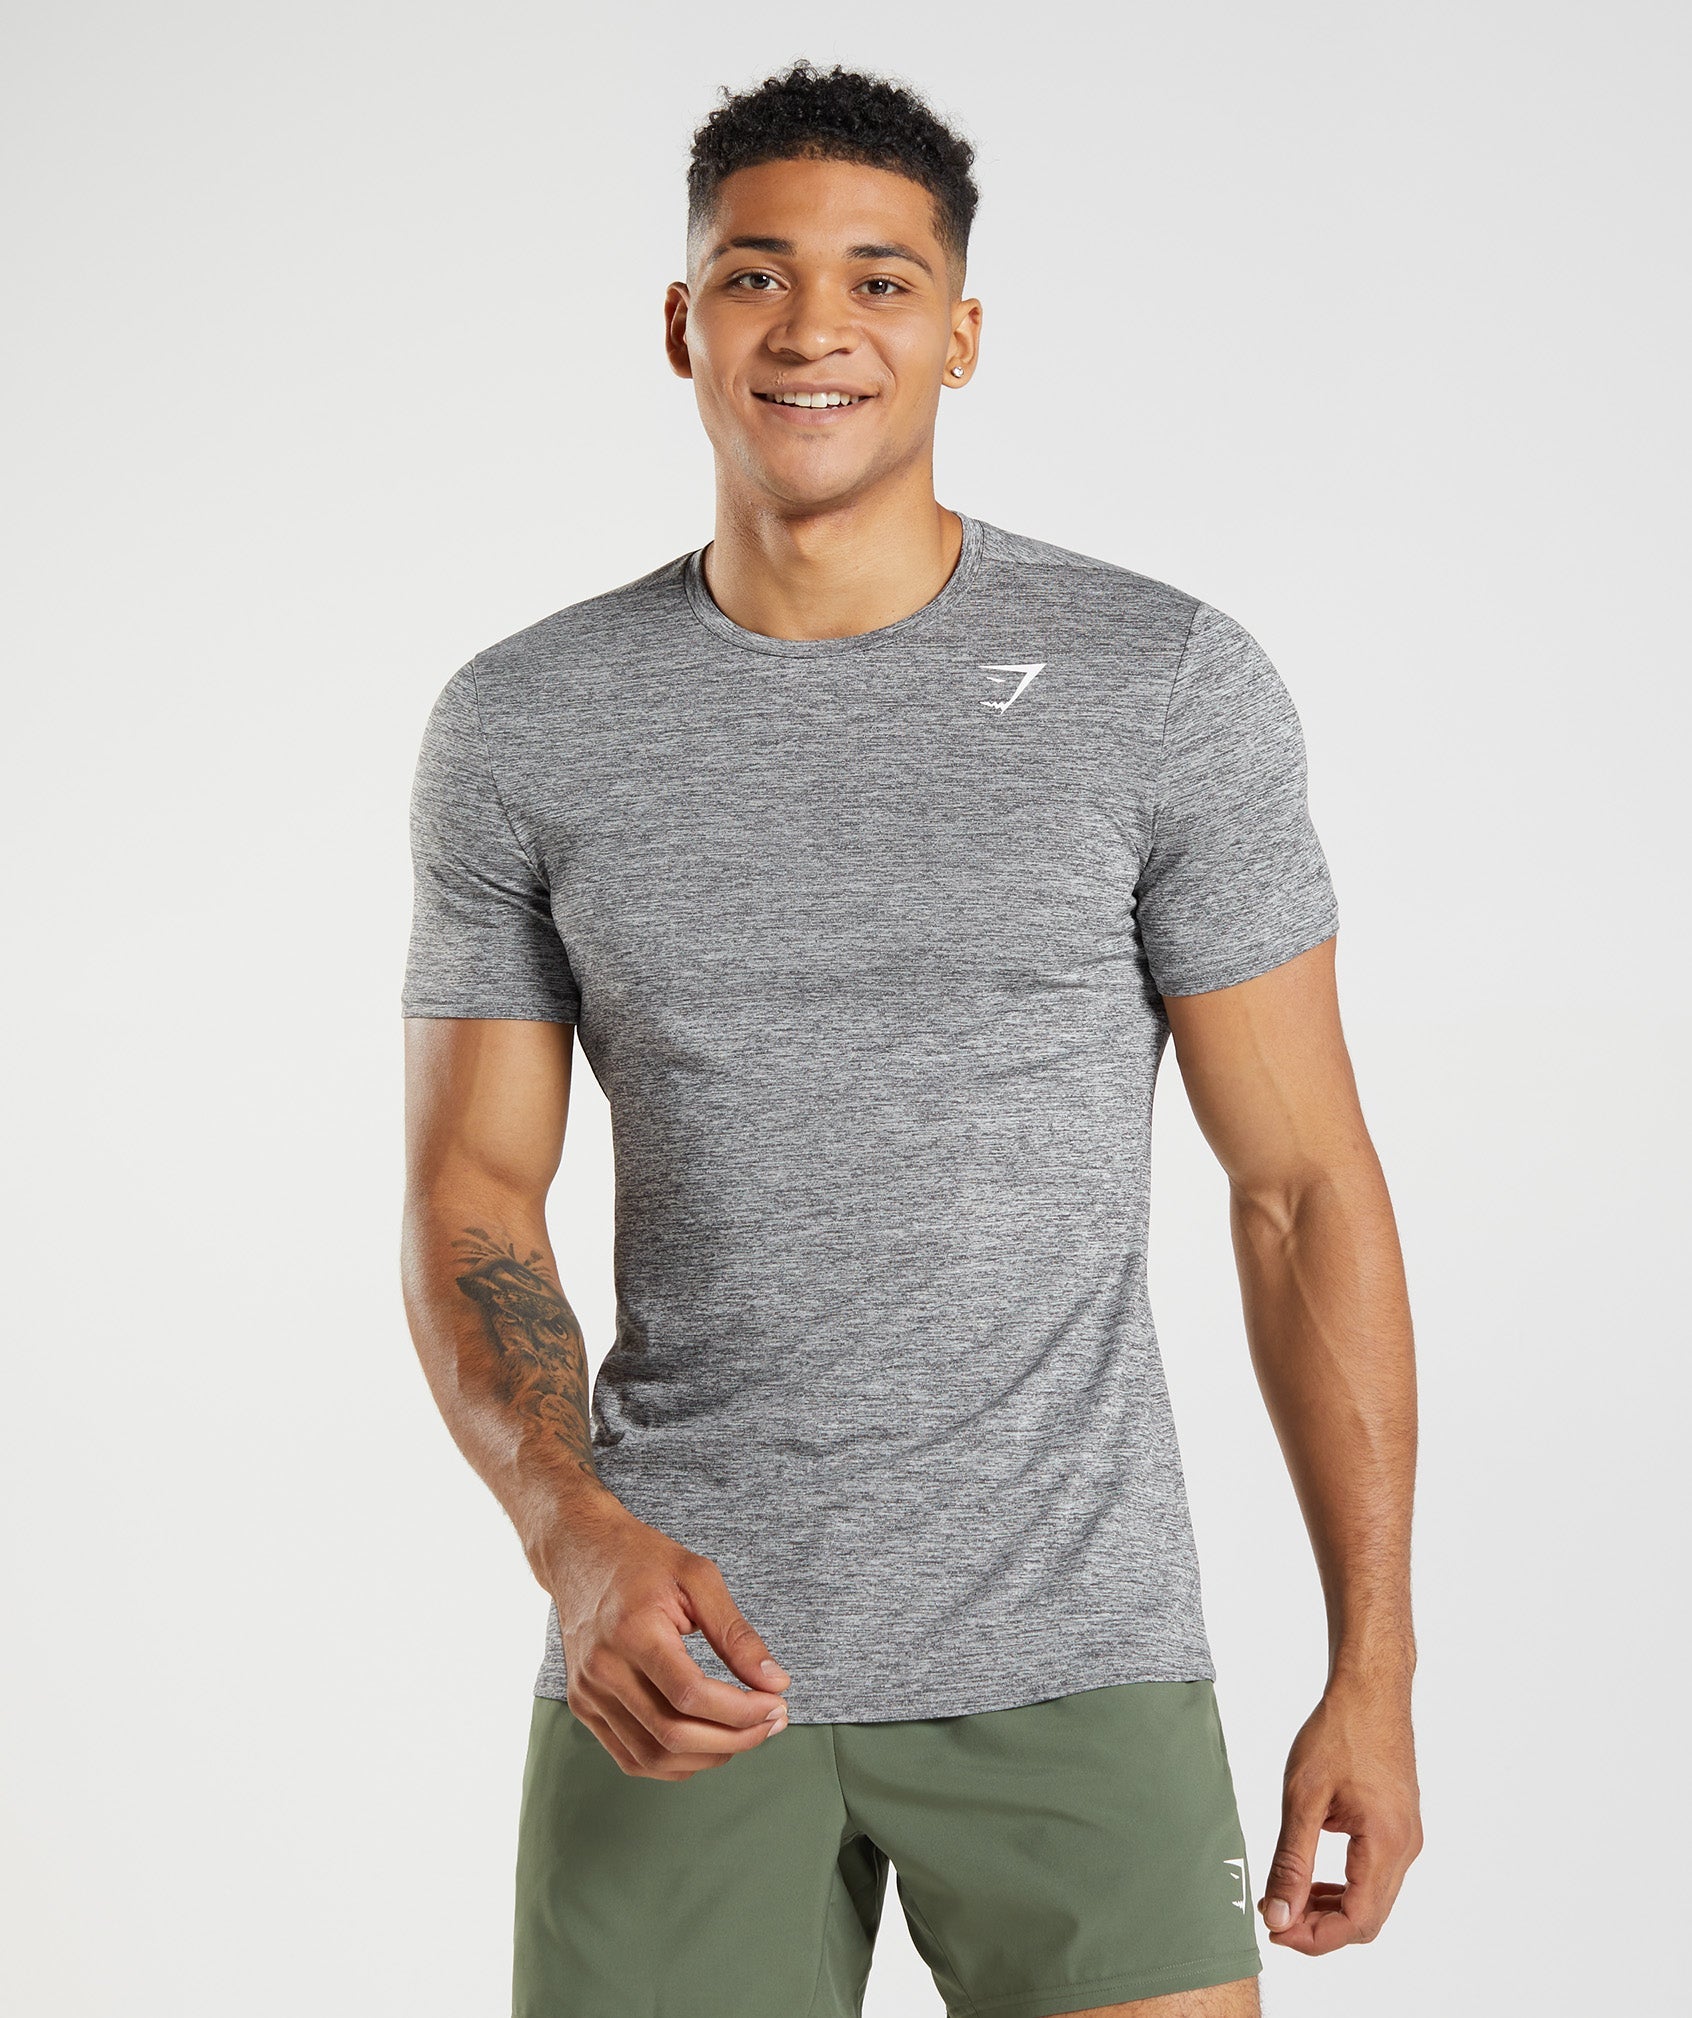 Shop Mens Gymshark, Gym, Fitness and Sports Apparel